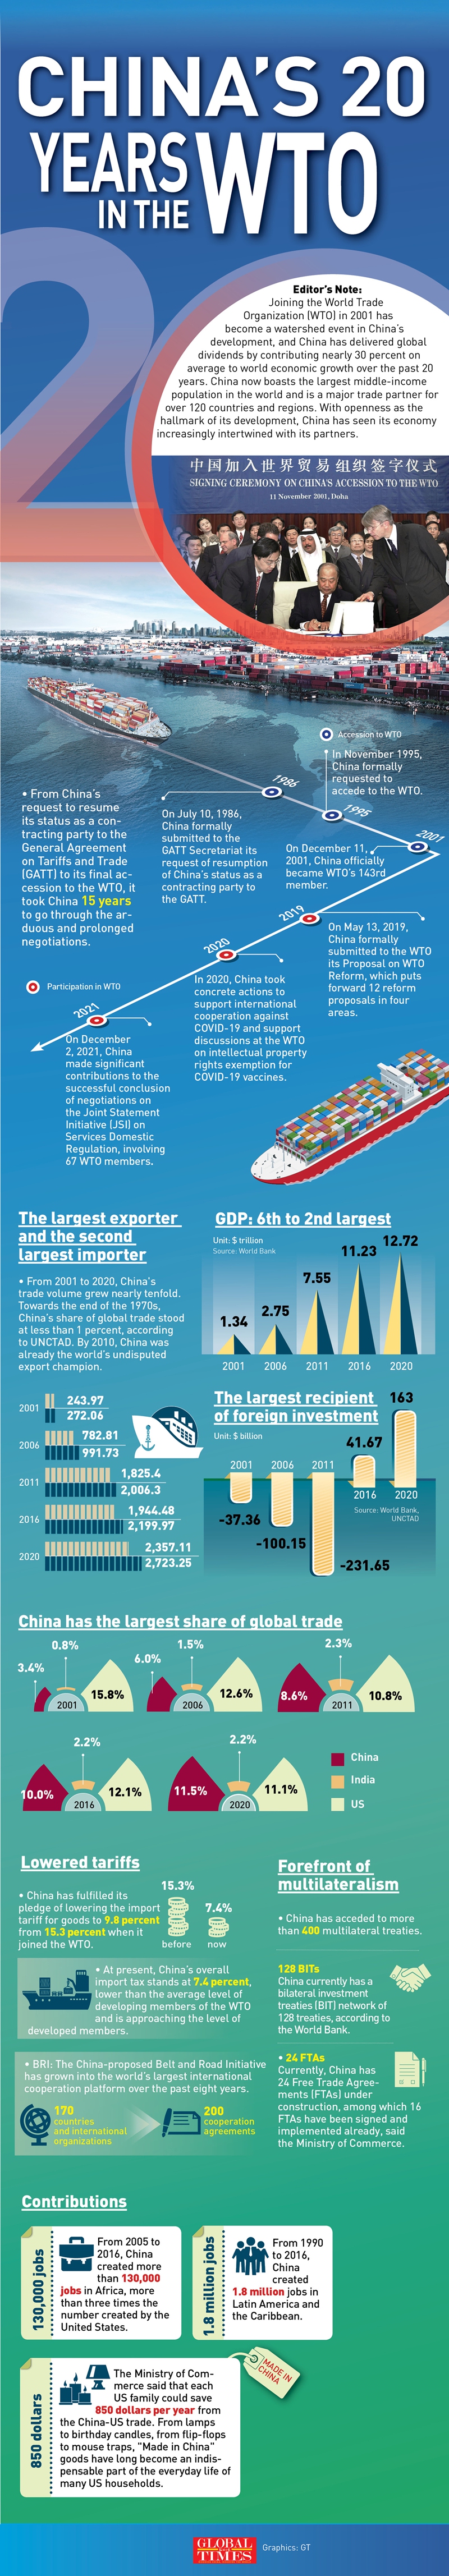 China's 20 years in the WTO Infographic: GT